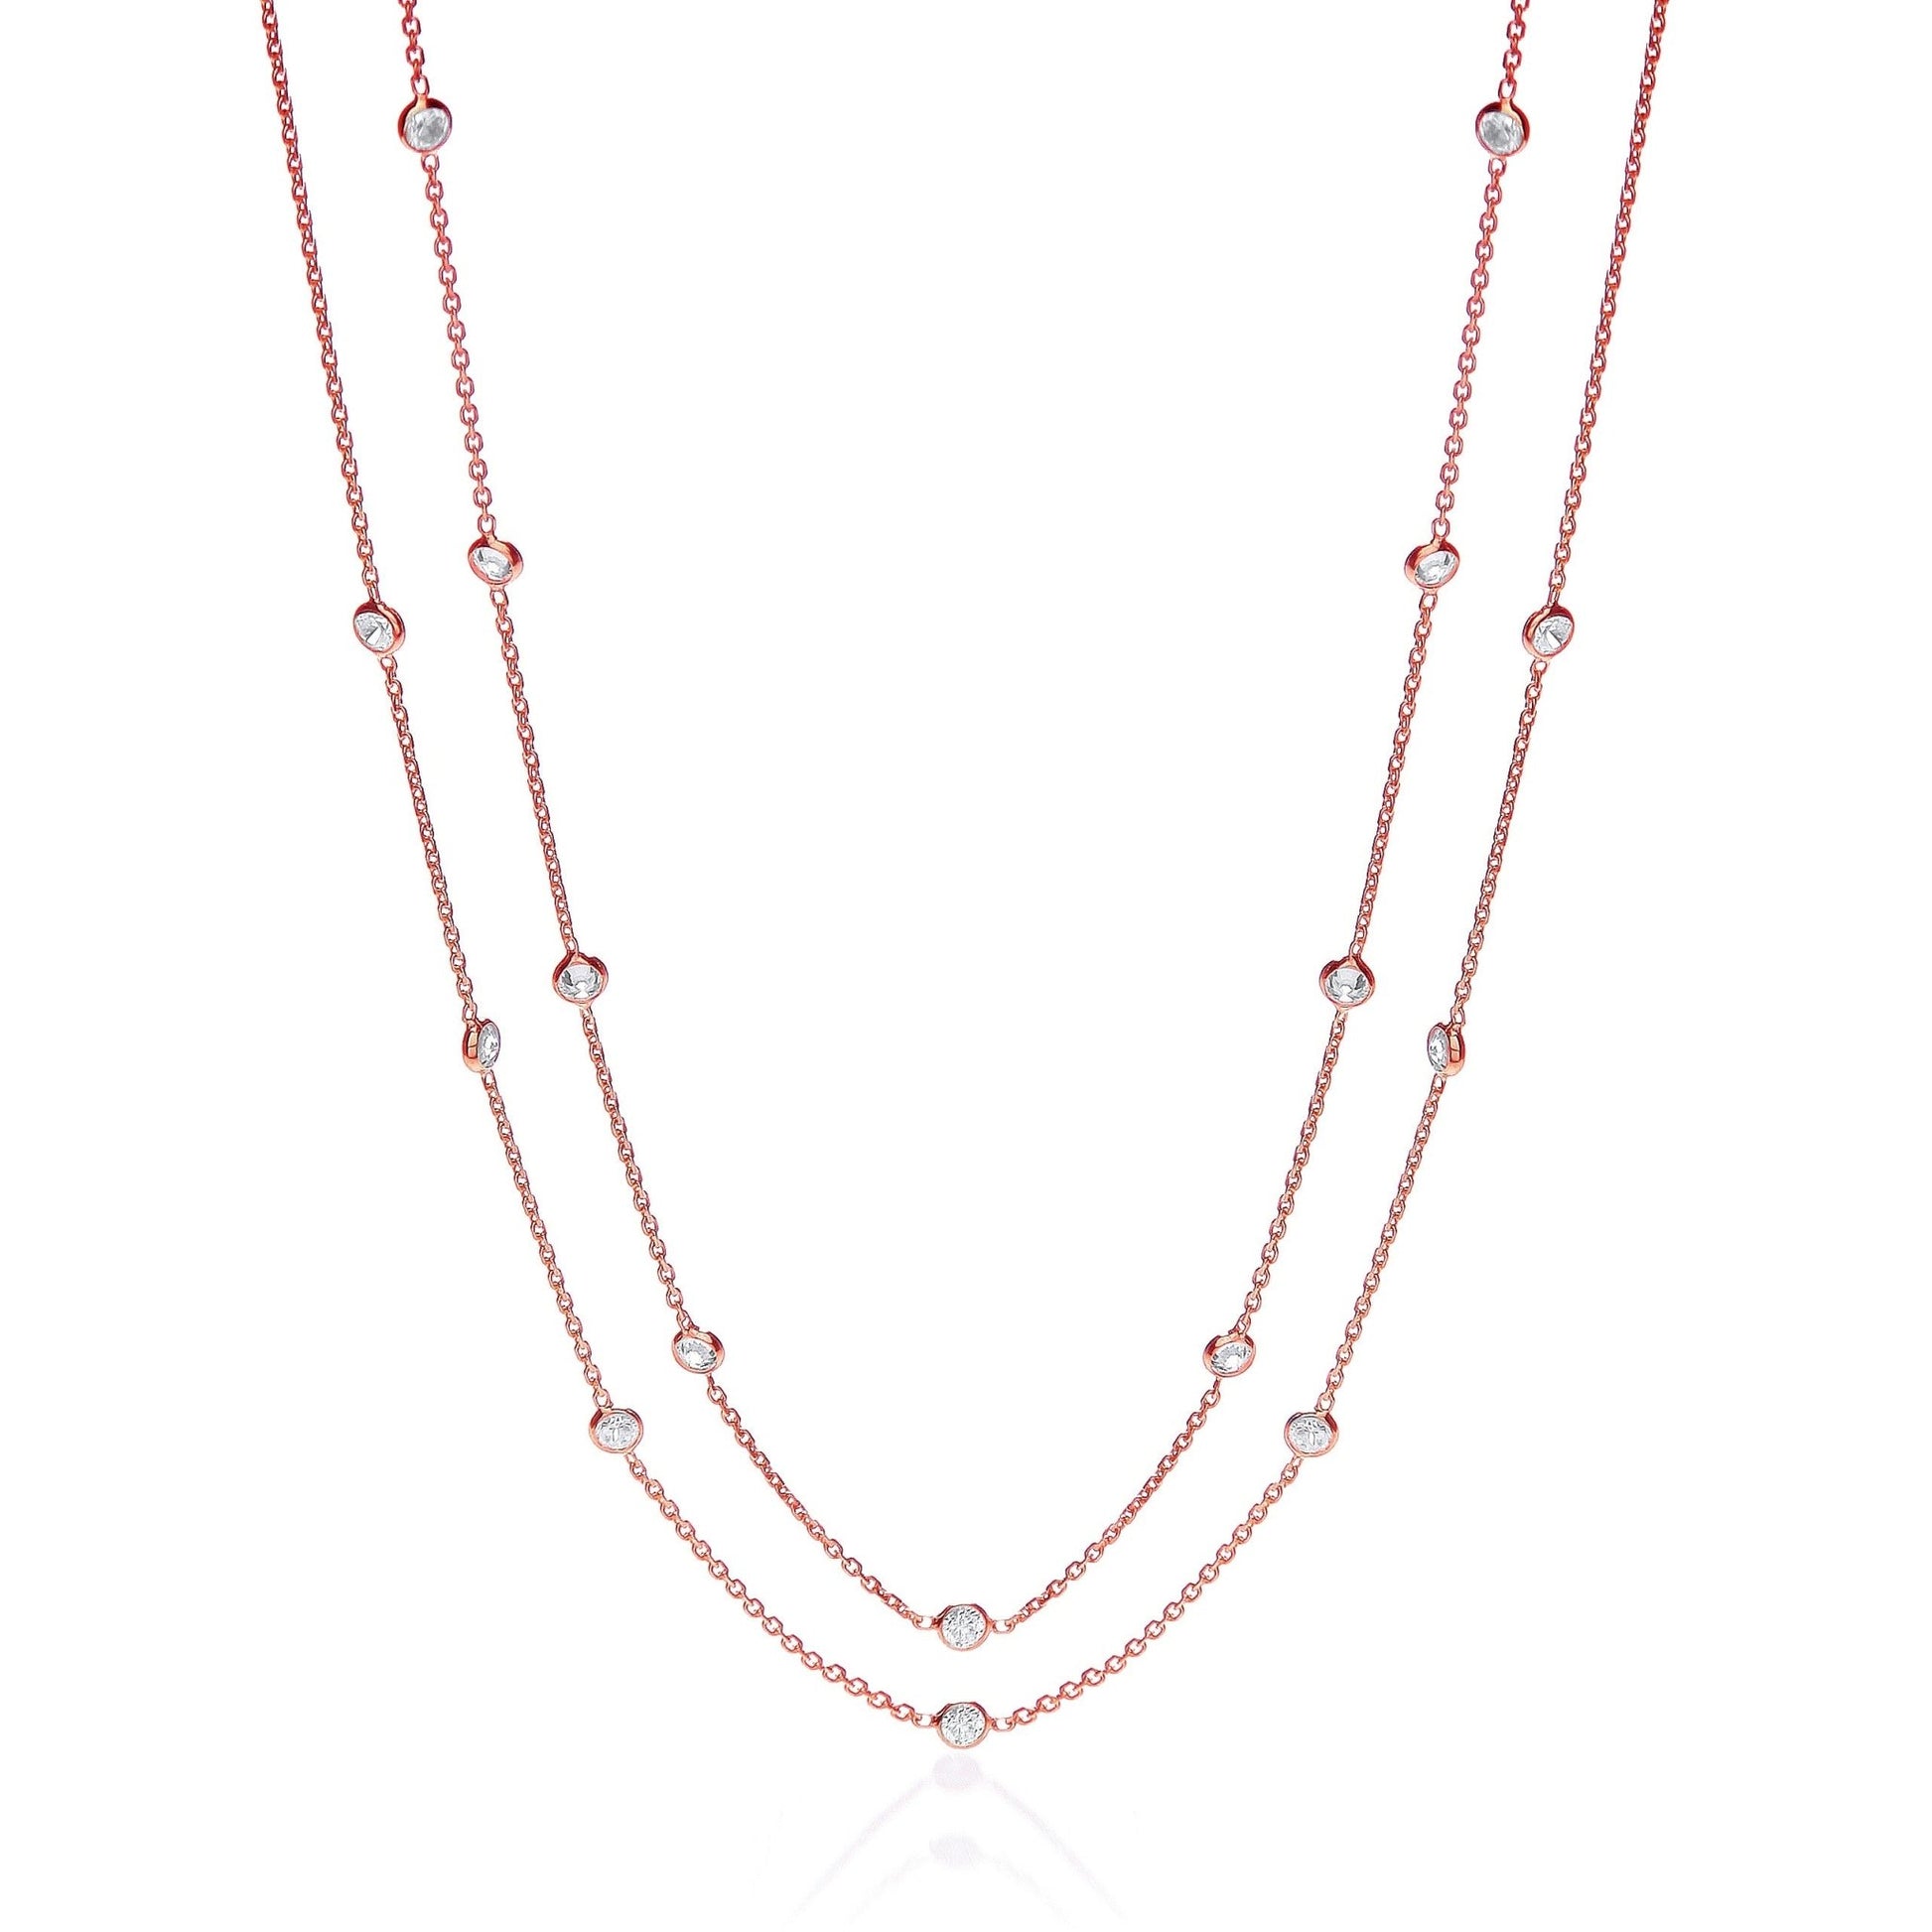 925 Sterling Silver Spetacle Chain Set With Cubic Zirconia 38" - FJewellery